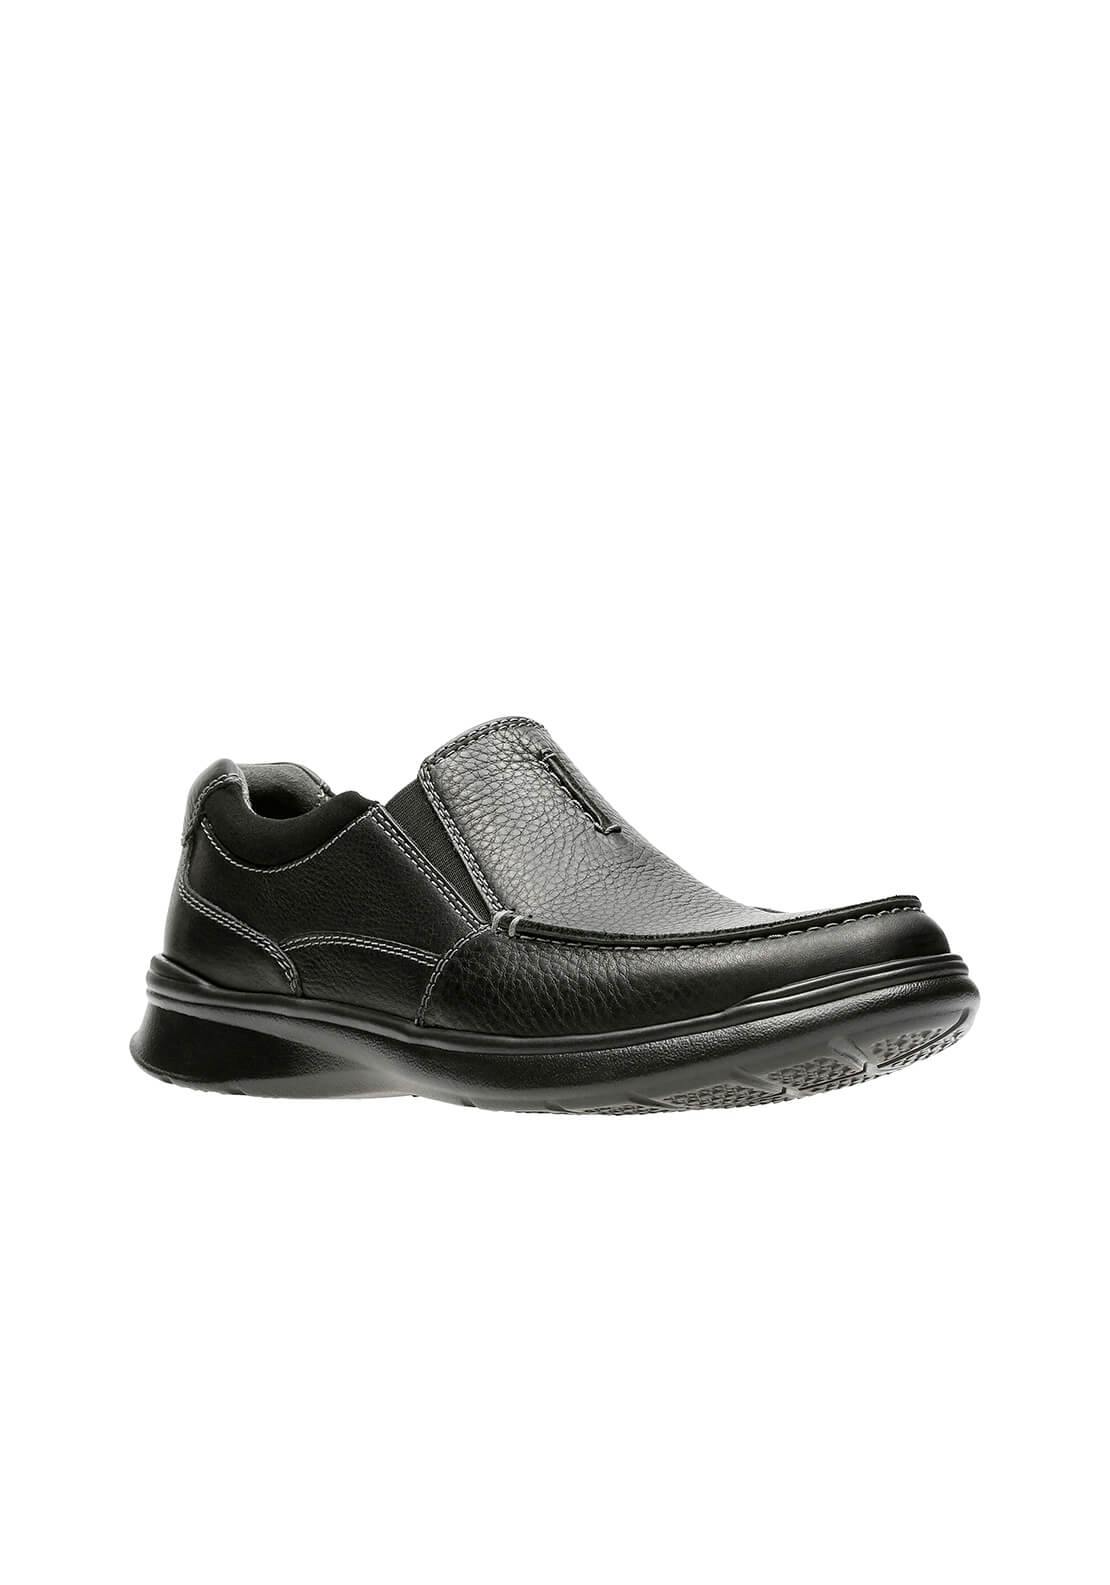 Clarks Cotrell Free Casual Shoe - Black 1 Shaws Department Stores